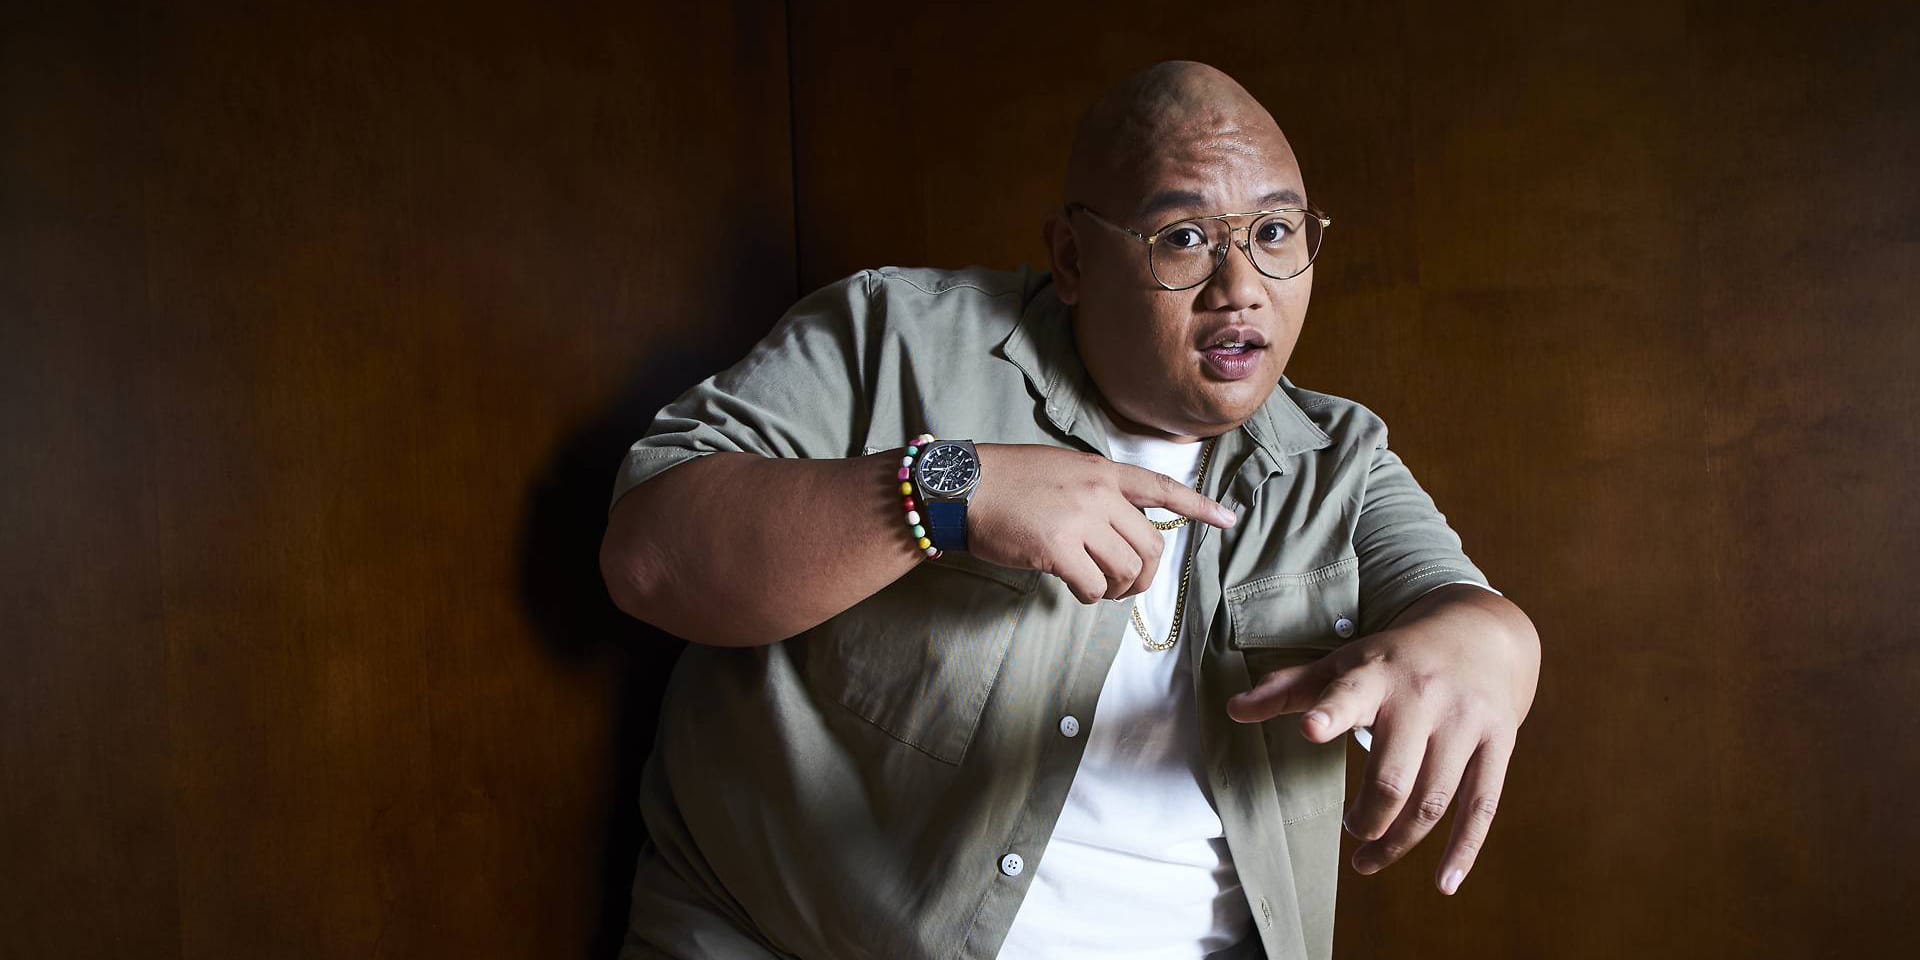 How old is Jacob Batalon?  Age, Bald, Family, Net Worth, Wiki